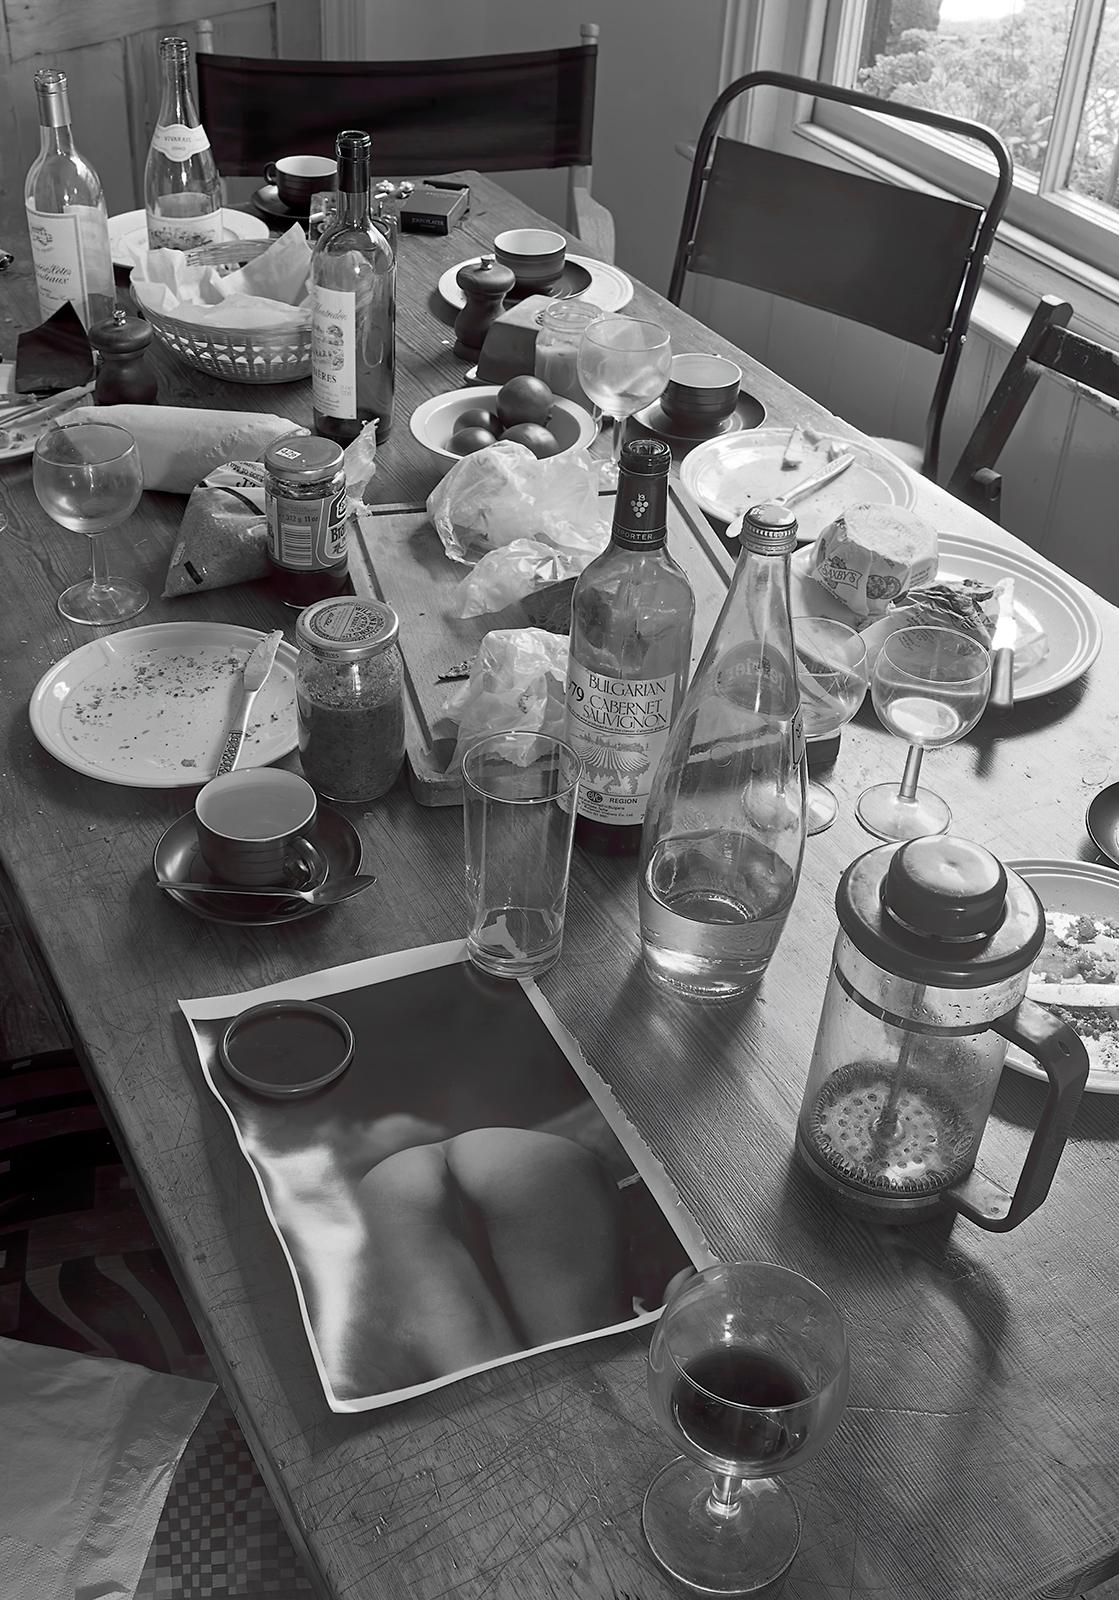 Limited edition still life print, Black white, Contemporary, Analogue- Table Top - Photograph by Ian Sanderson